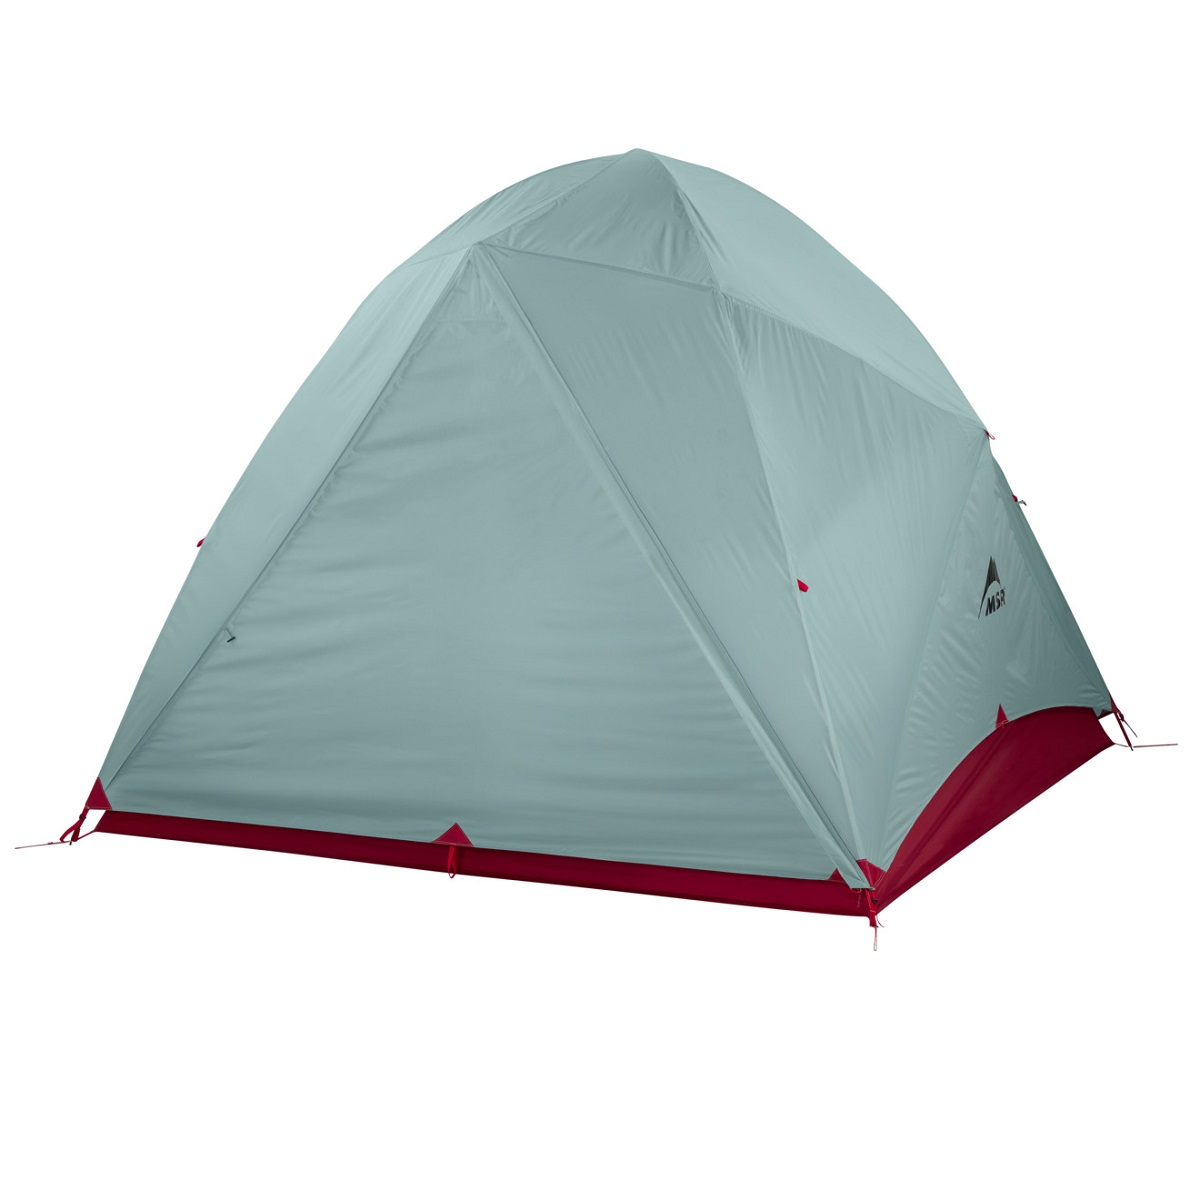 MSR Habiscape 4 Tent - Rear Fly Closed